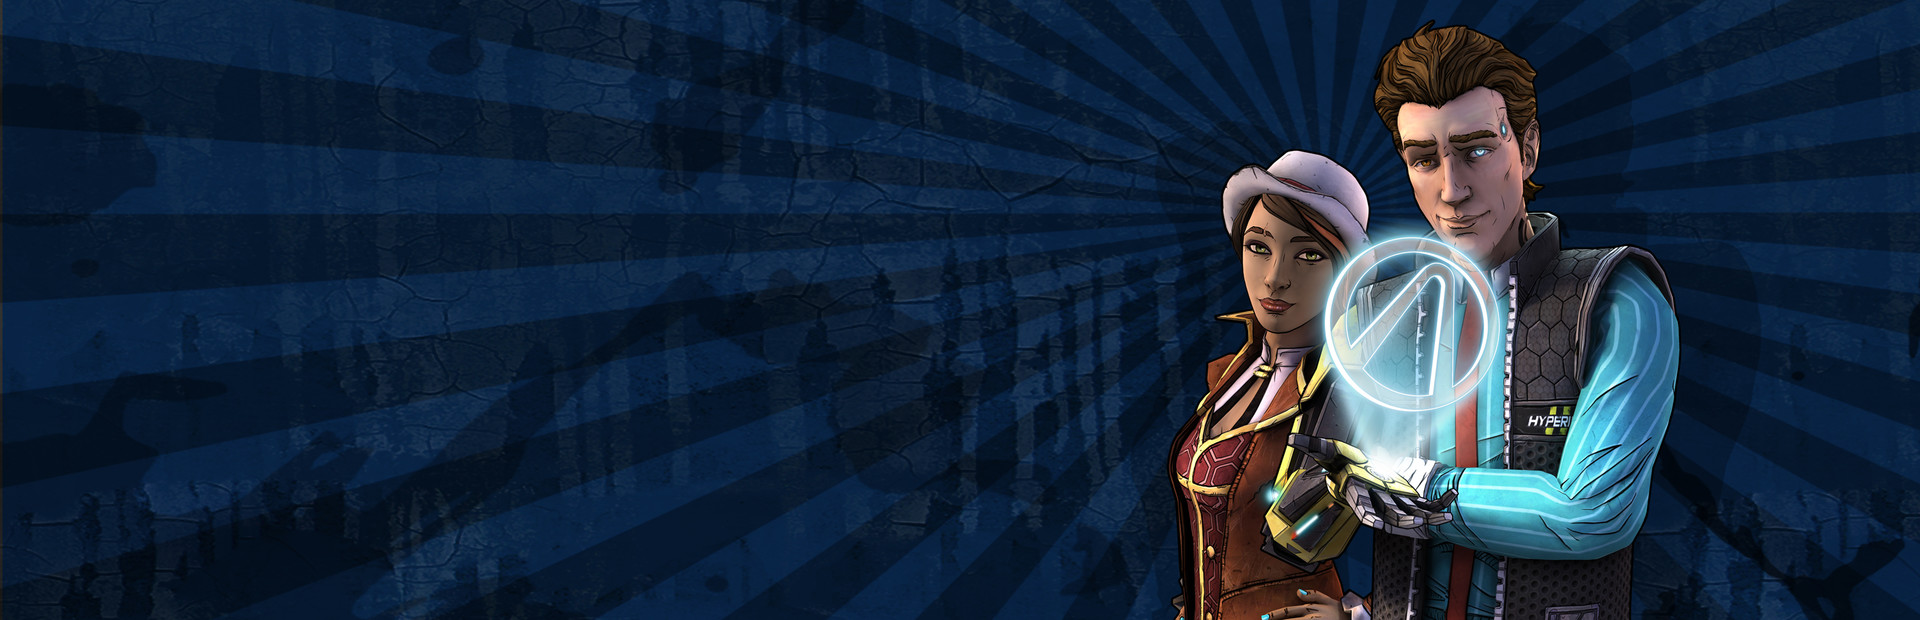 Tales from the Borderlands cover image